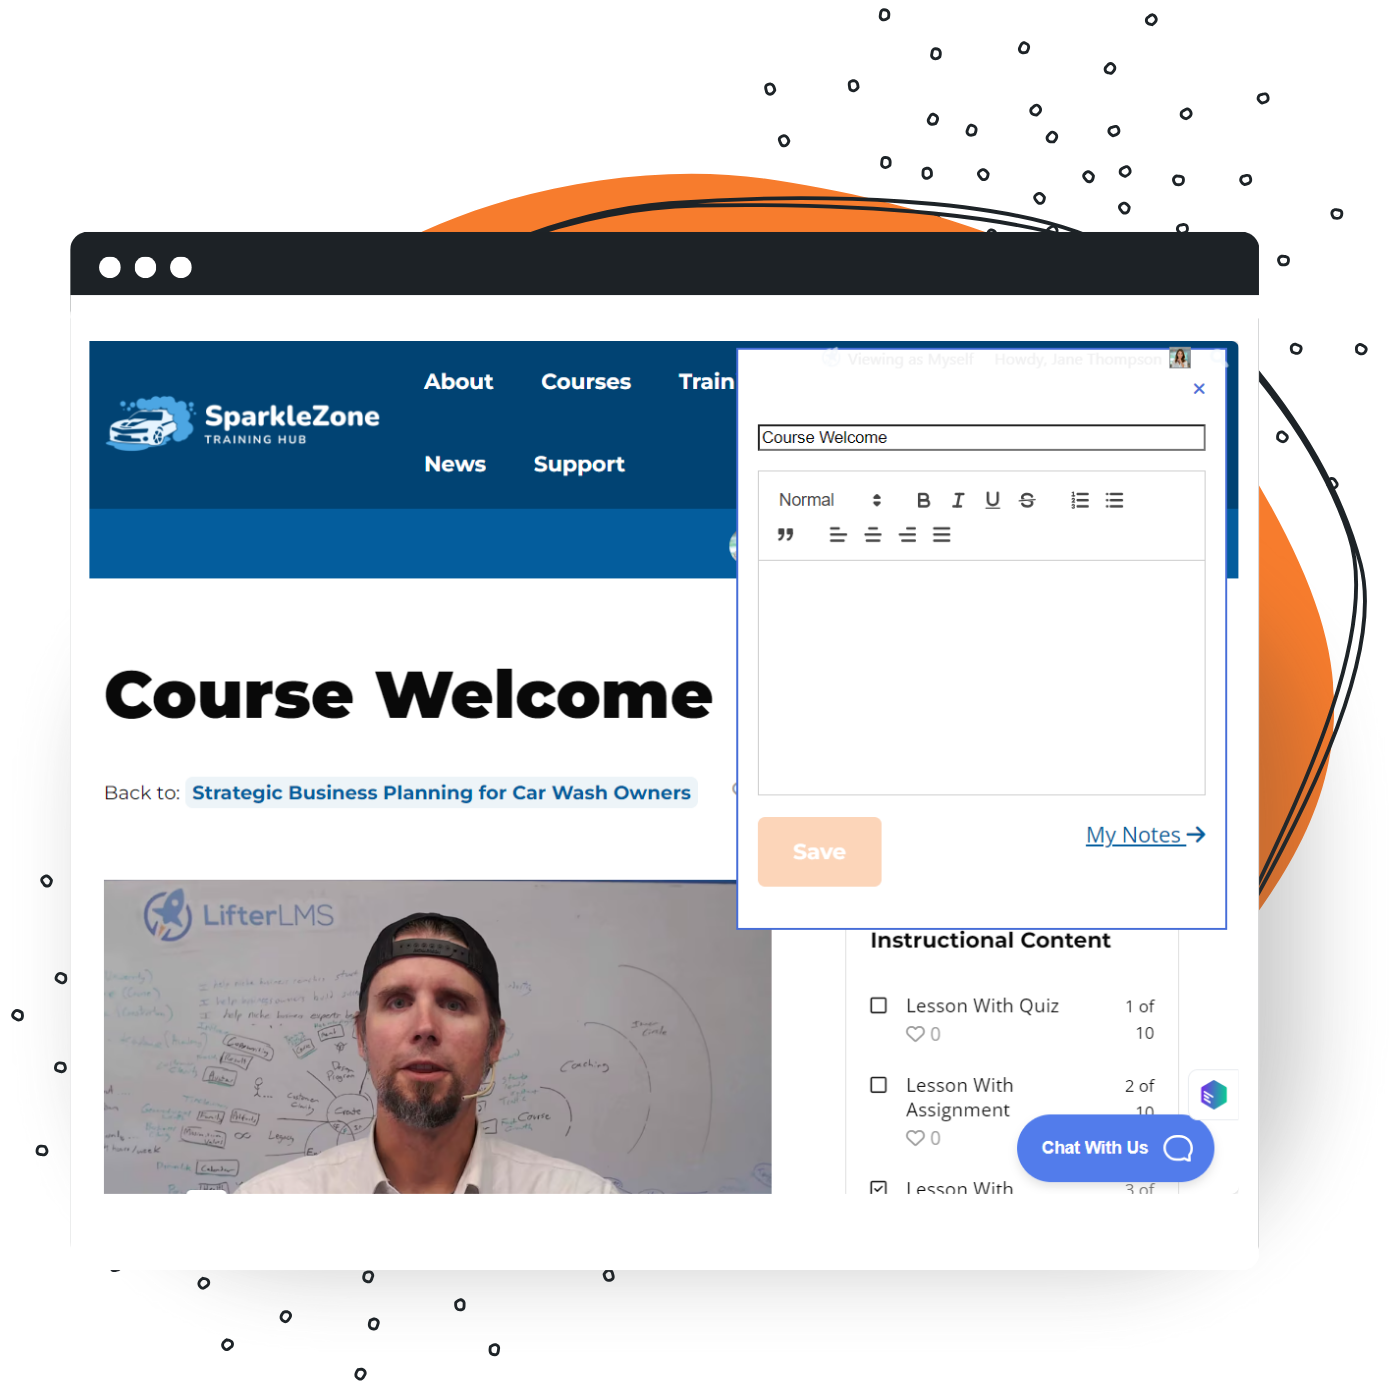 Screenshot of LifterLMS Notes add-on where you can add notes for your course and lesson